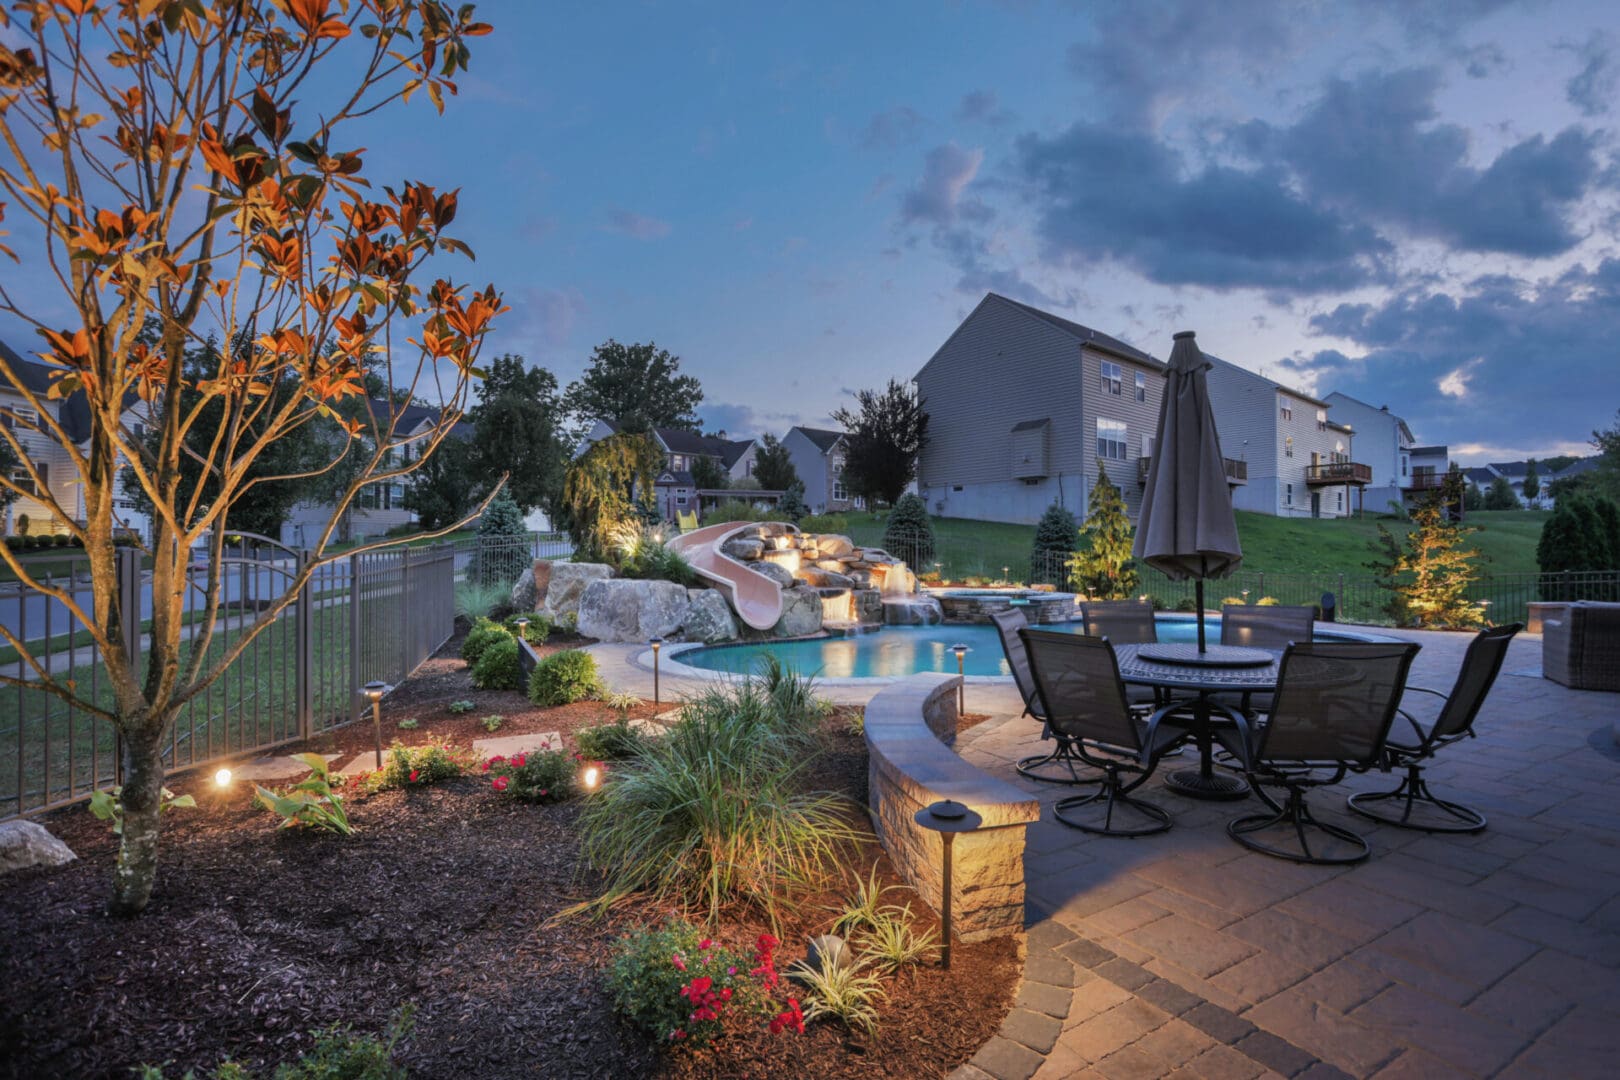 A backyard with outdoor lighting and a pool at dusk.